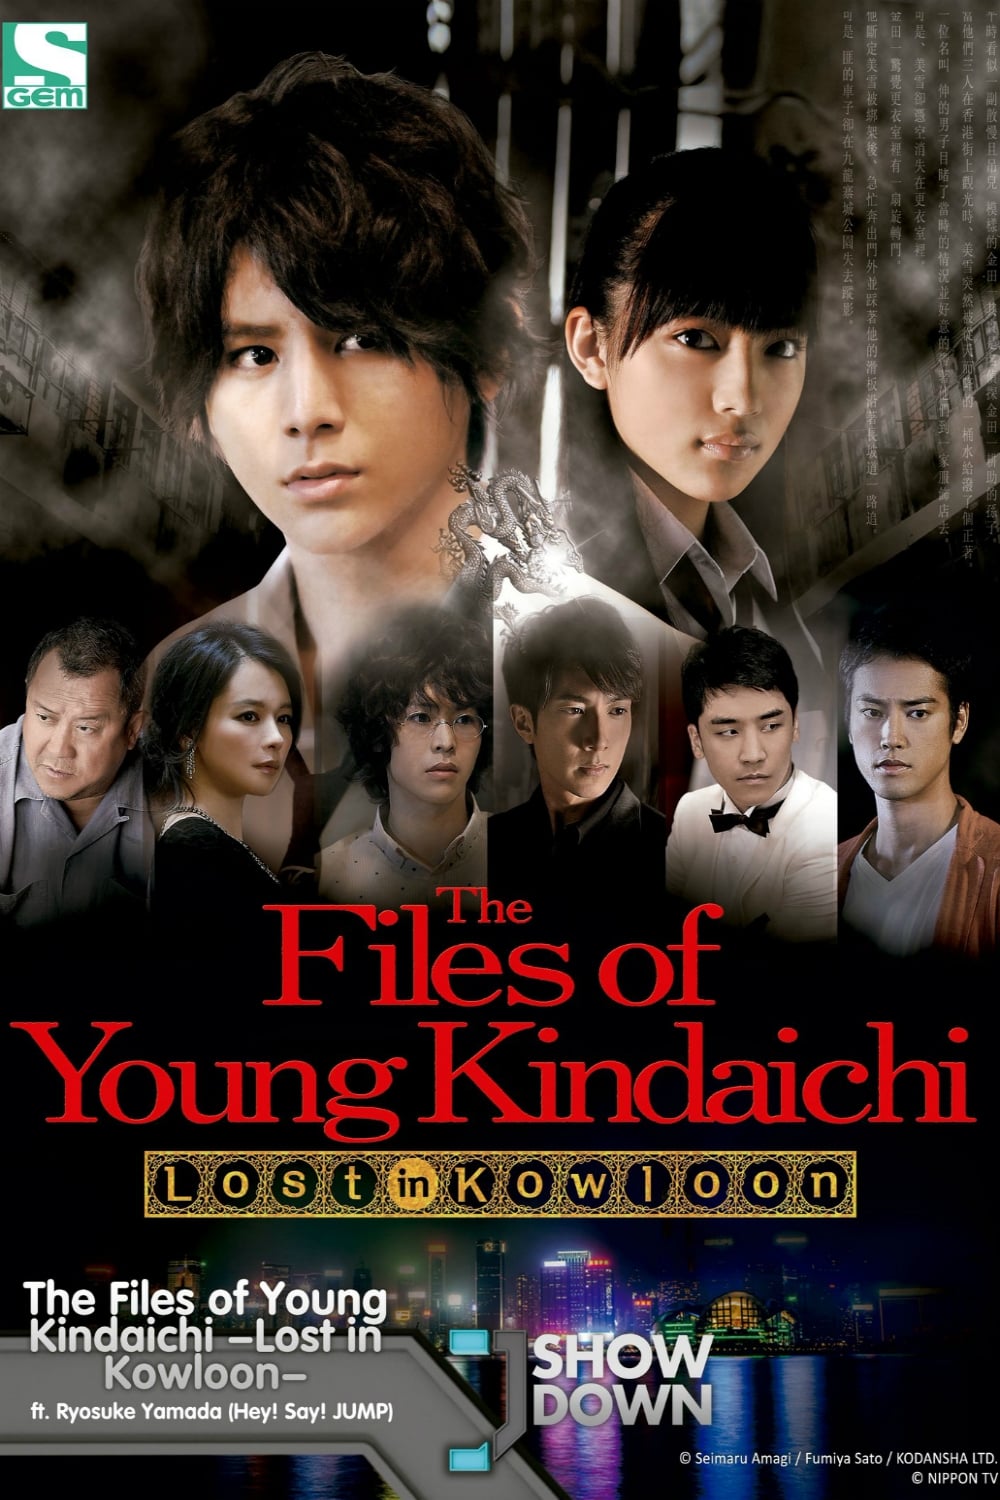 The Files of Young Kindaichi: Lost in Kowloon